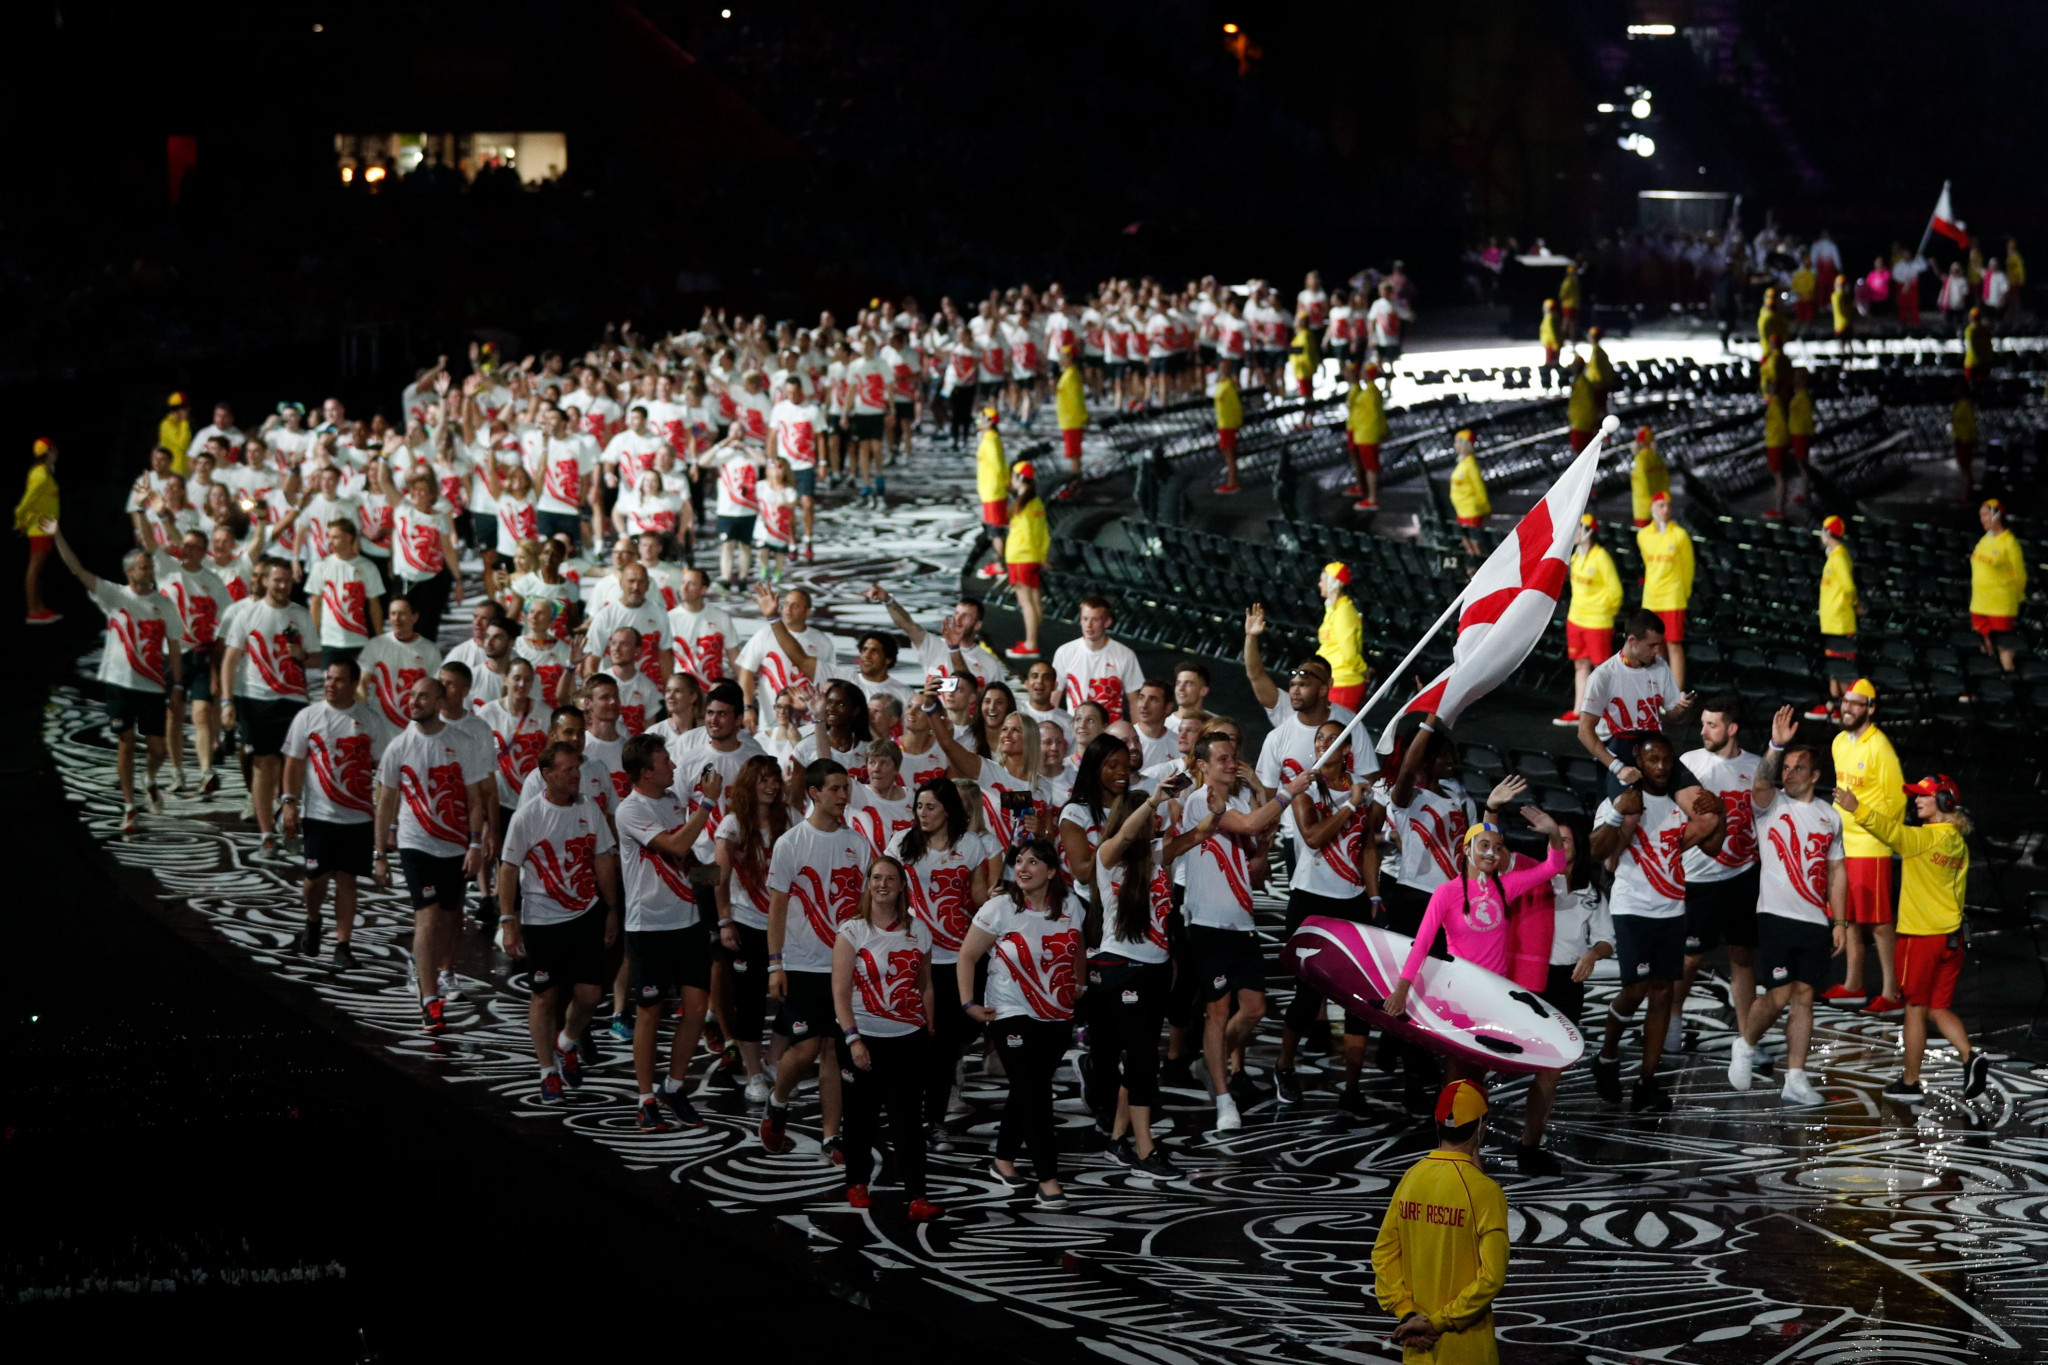 England's team marched in the Gold Coast 2018 Opening Ceremony ©Getty Images